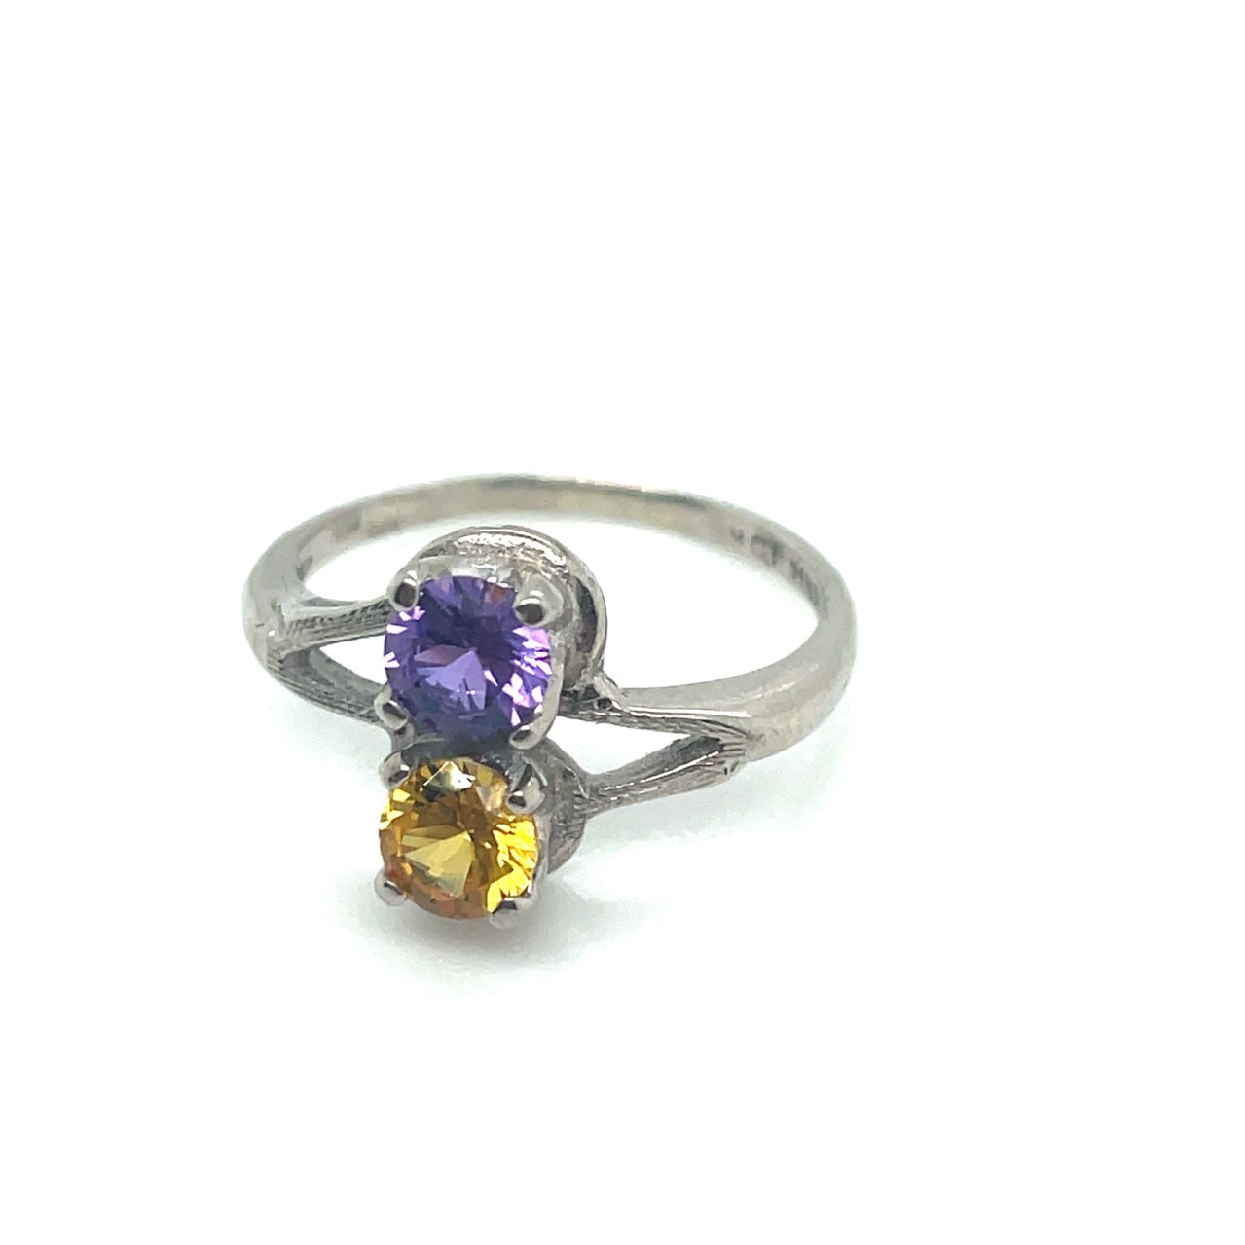 10K White Gold Amethyst and Citrine Ring Size 5